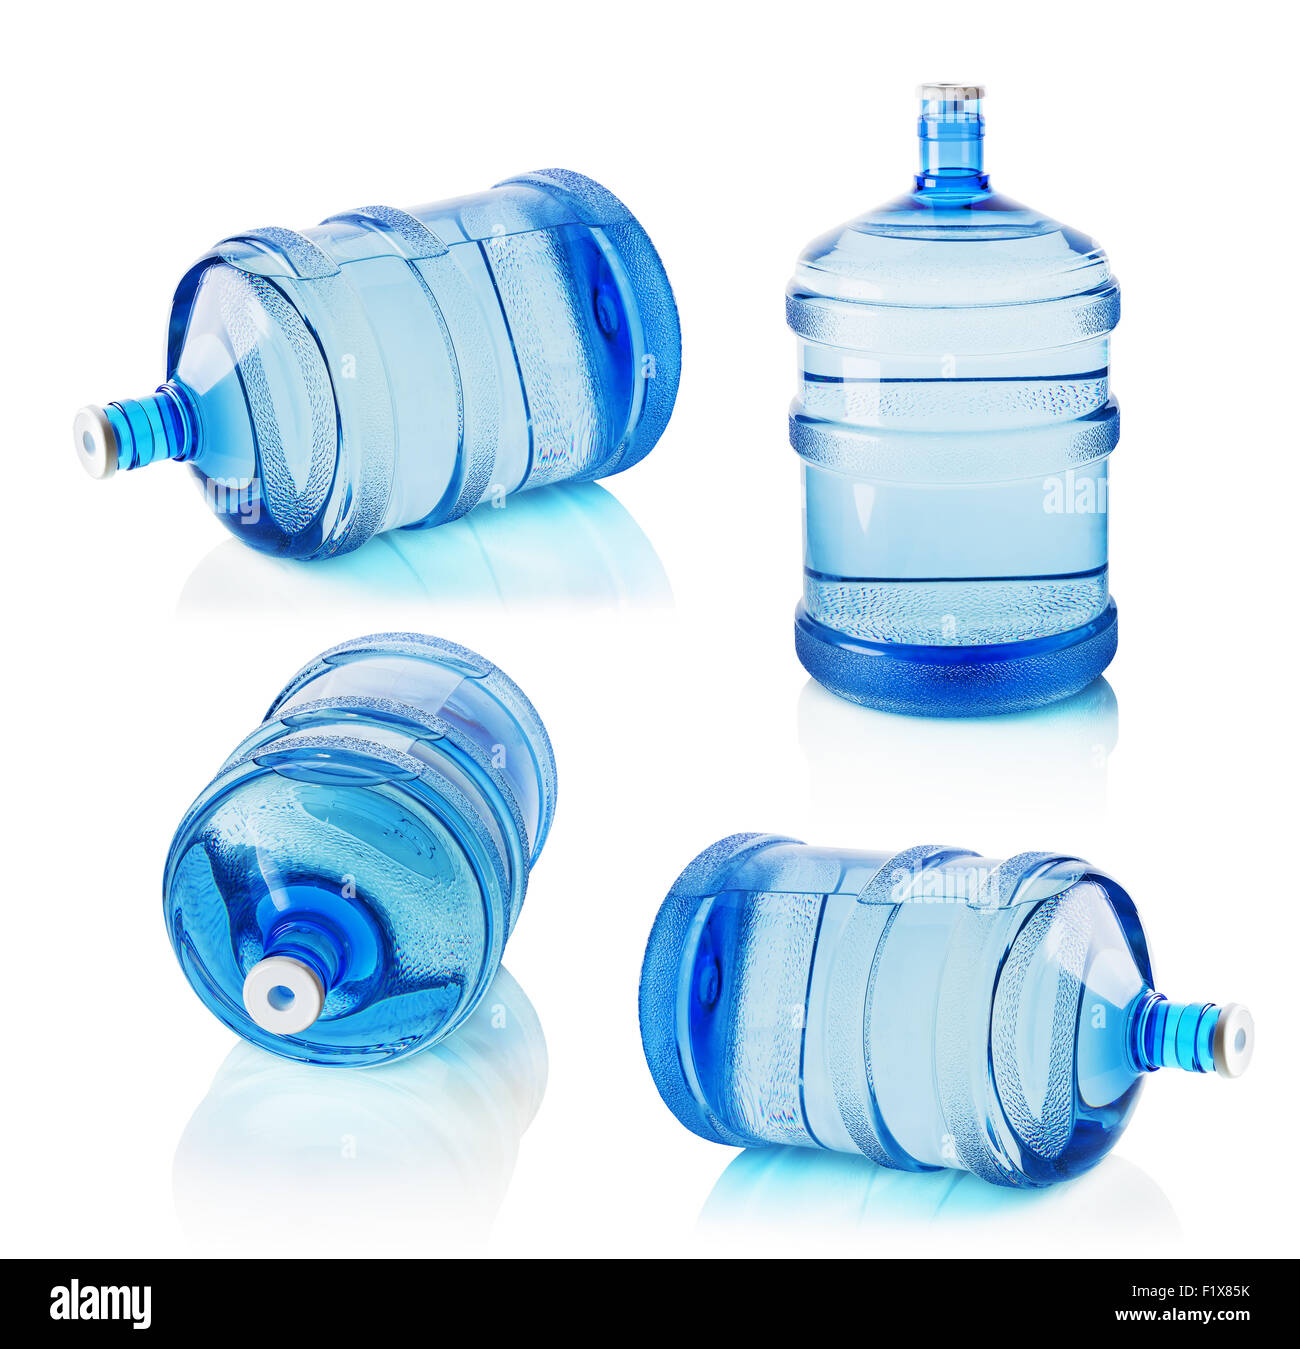 https://c8.alamy.com/comp/F1X85K/set-of-big-bottles-of-water-isolated-on-the-white-background-F1X85K.jpg